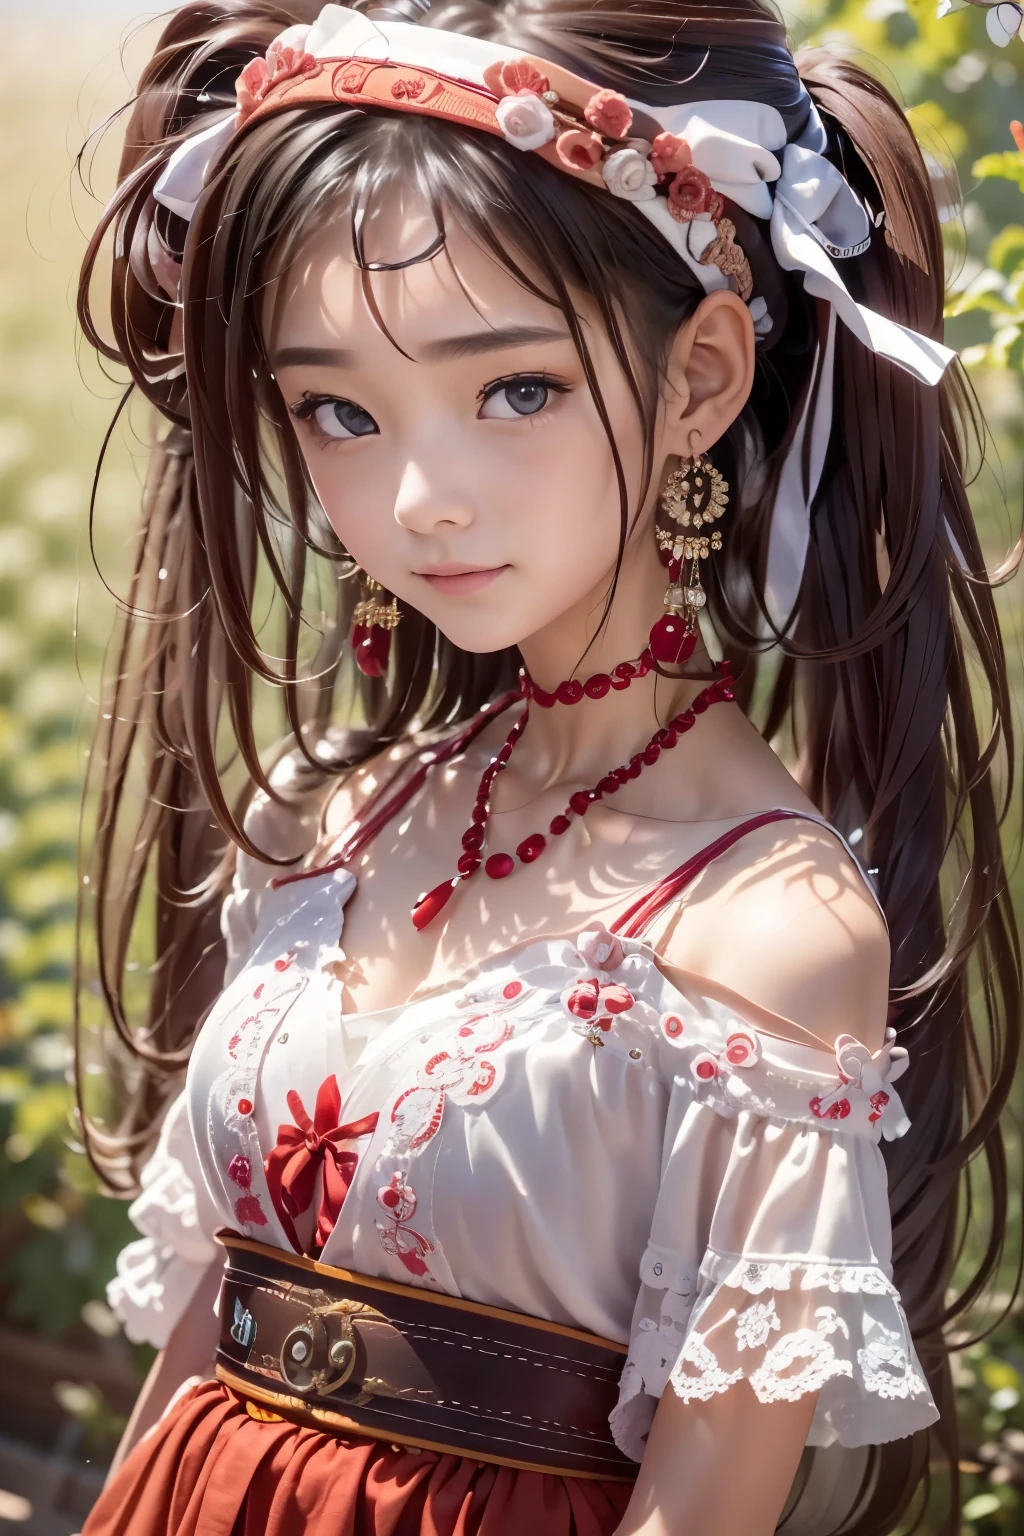 ((sfw: 1.4)), (sfw,She wears a long white embroidered skirt, a red blouse with lace, a white apron tied around her waist, red socks, and brown leather shoes. A red scarf is on her head. Her accessories include necklaces, earrings, and bracelets, 1 girl)), ultra high resolution, (realistic: 1.4), RAW photo, highest quality, (photorealistic stick), focus, soft light, ((15 years old)), ((Japanese)), (((young face))), (surface), (depth of field), masterpiece, (photorealistic), woman , bangs, ((1 girl))